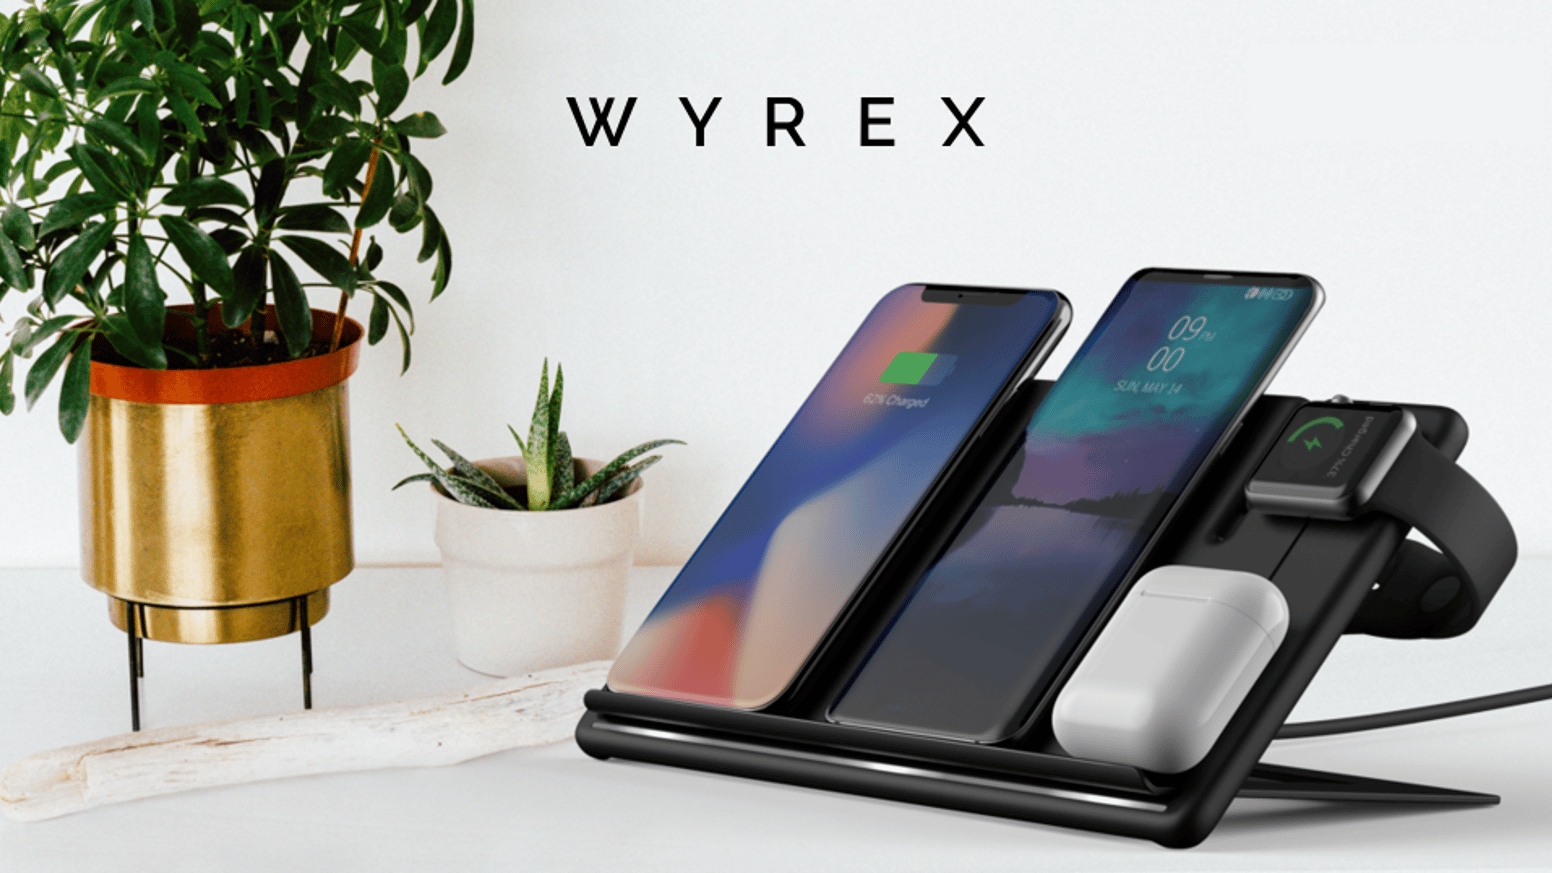 One for all: Wireless Fast Charging Pad. Charge Up To 4 Devices Including iPhone, Apple Watch, AirPods, And Android Phones.